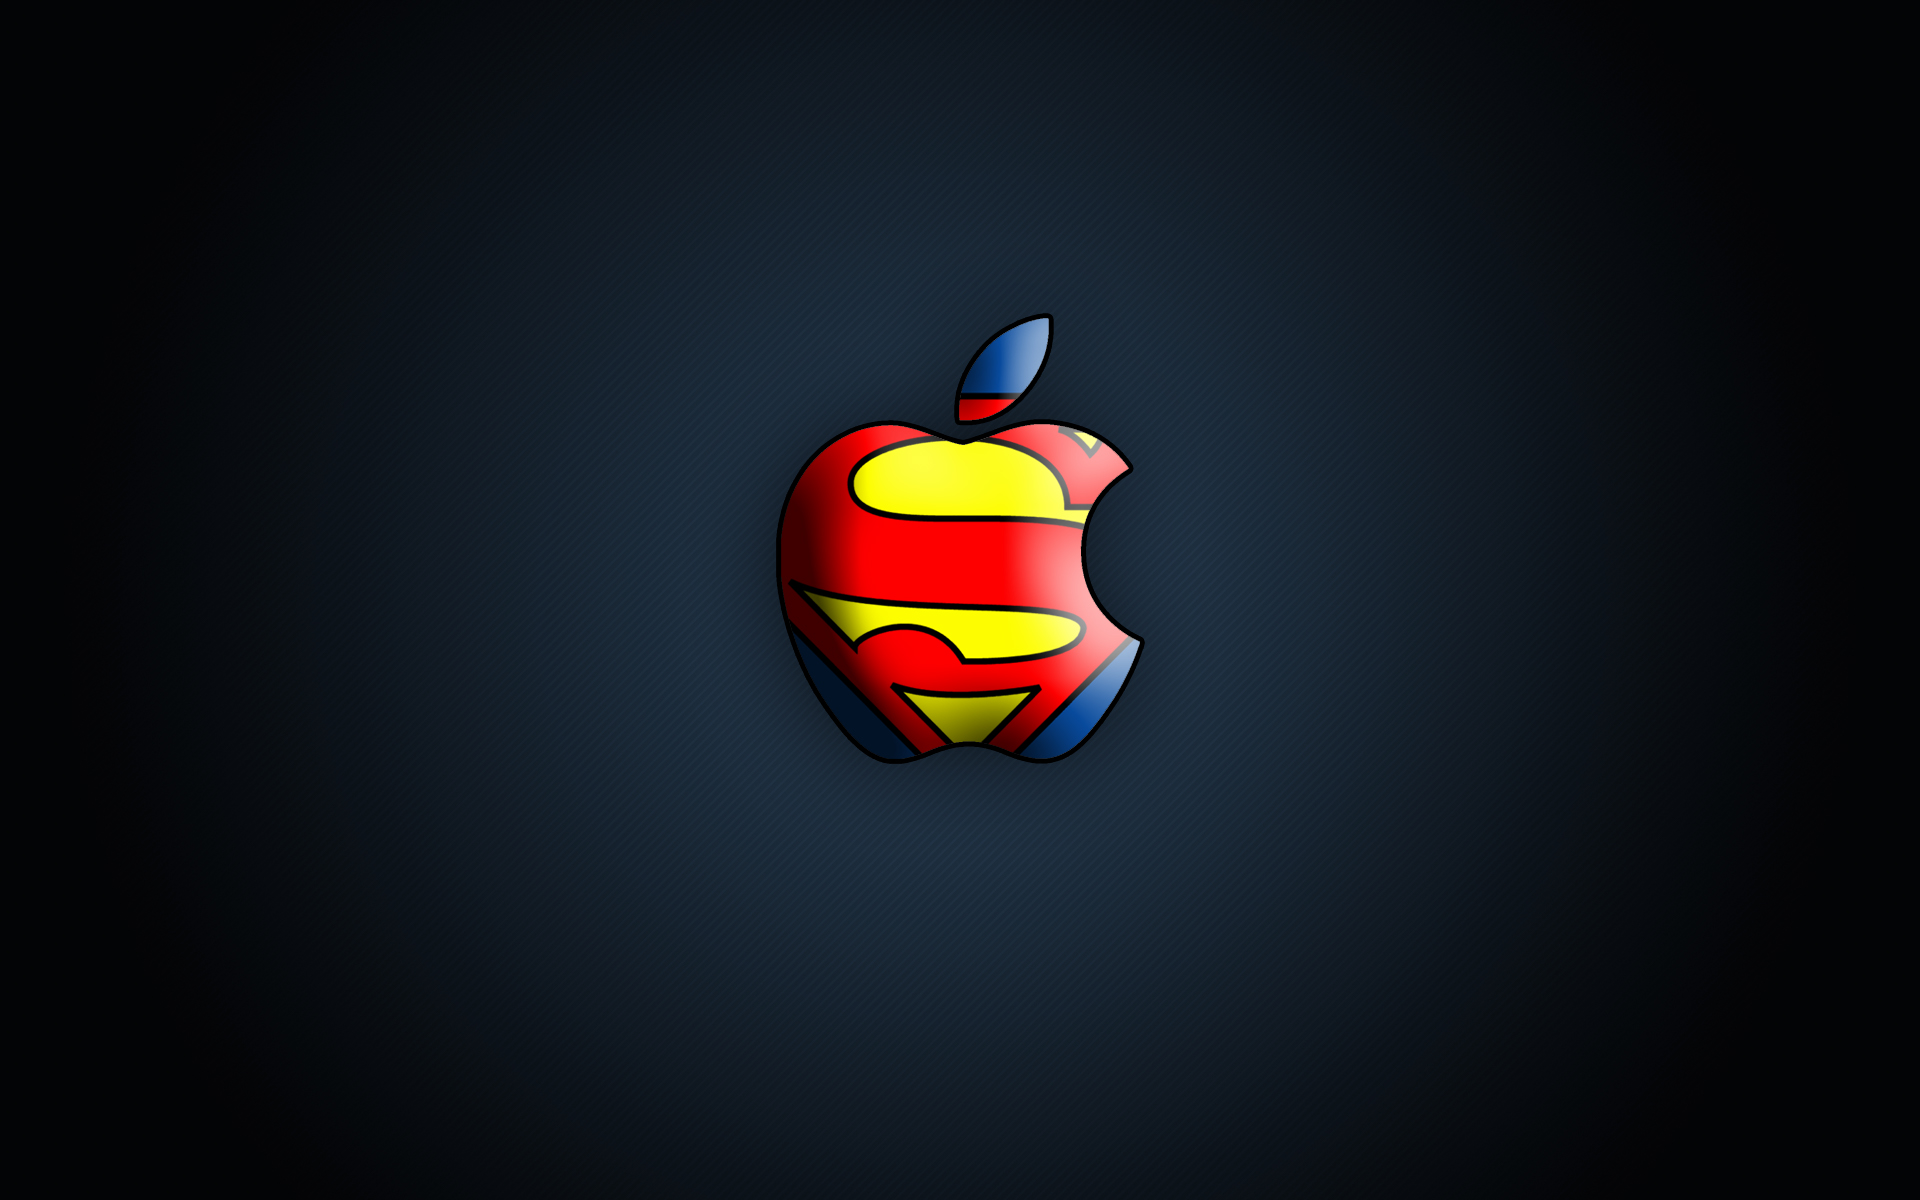 Feel free to download SUPERMAC WALLPAPER 1920 x 1200